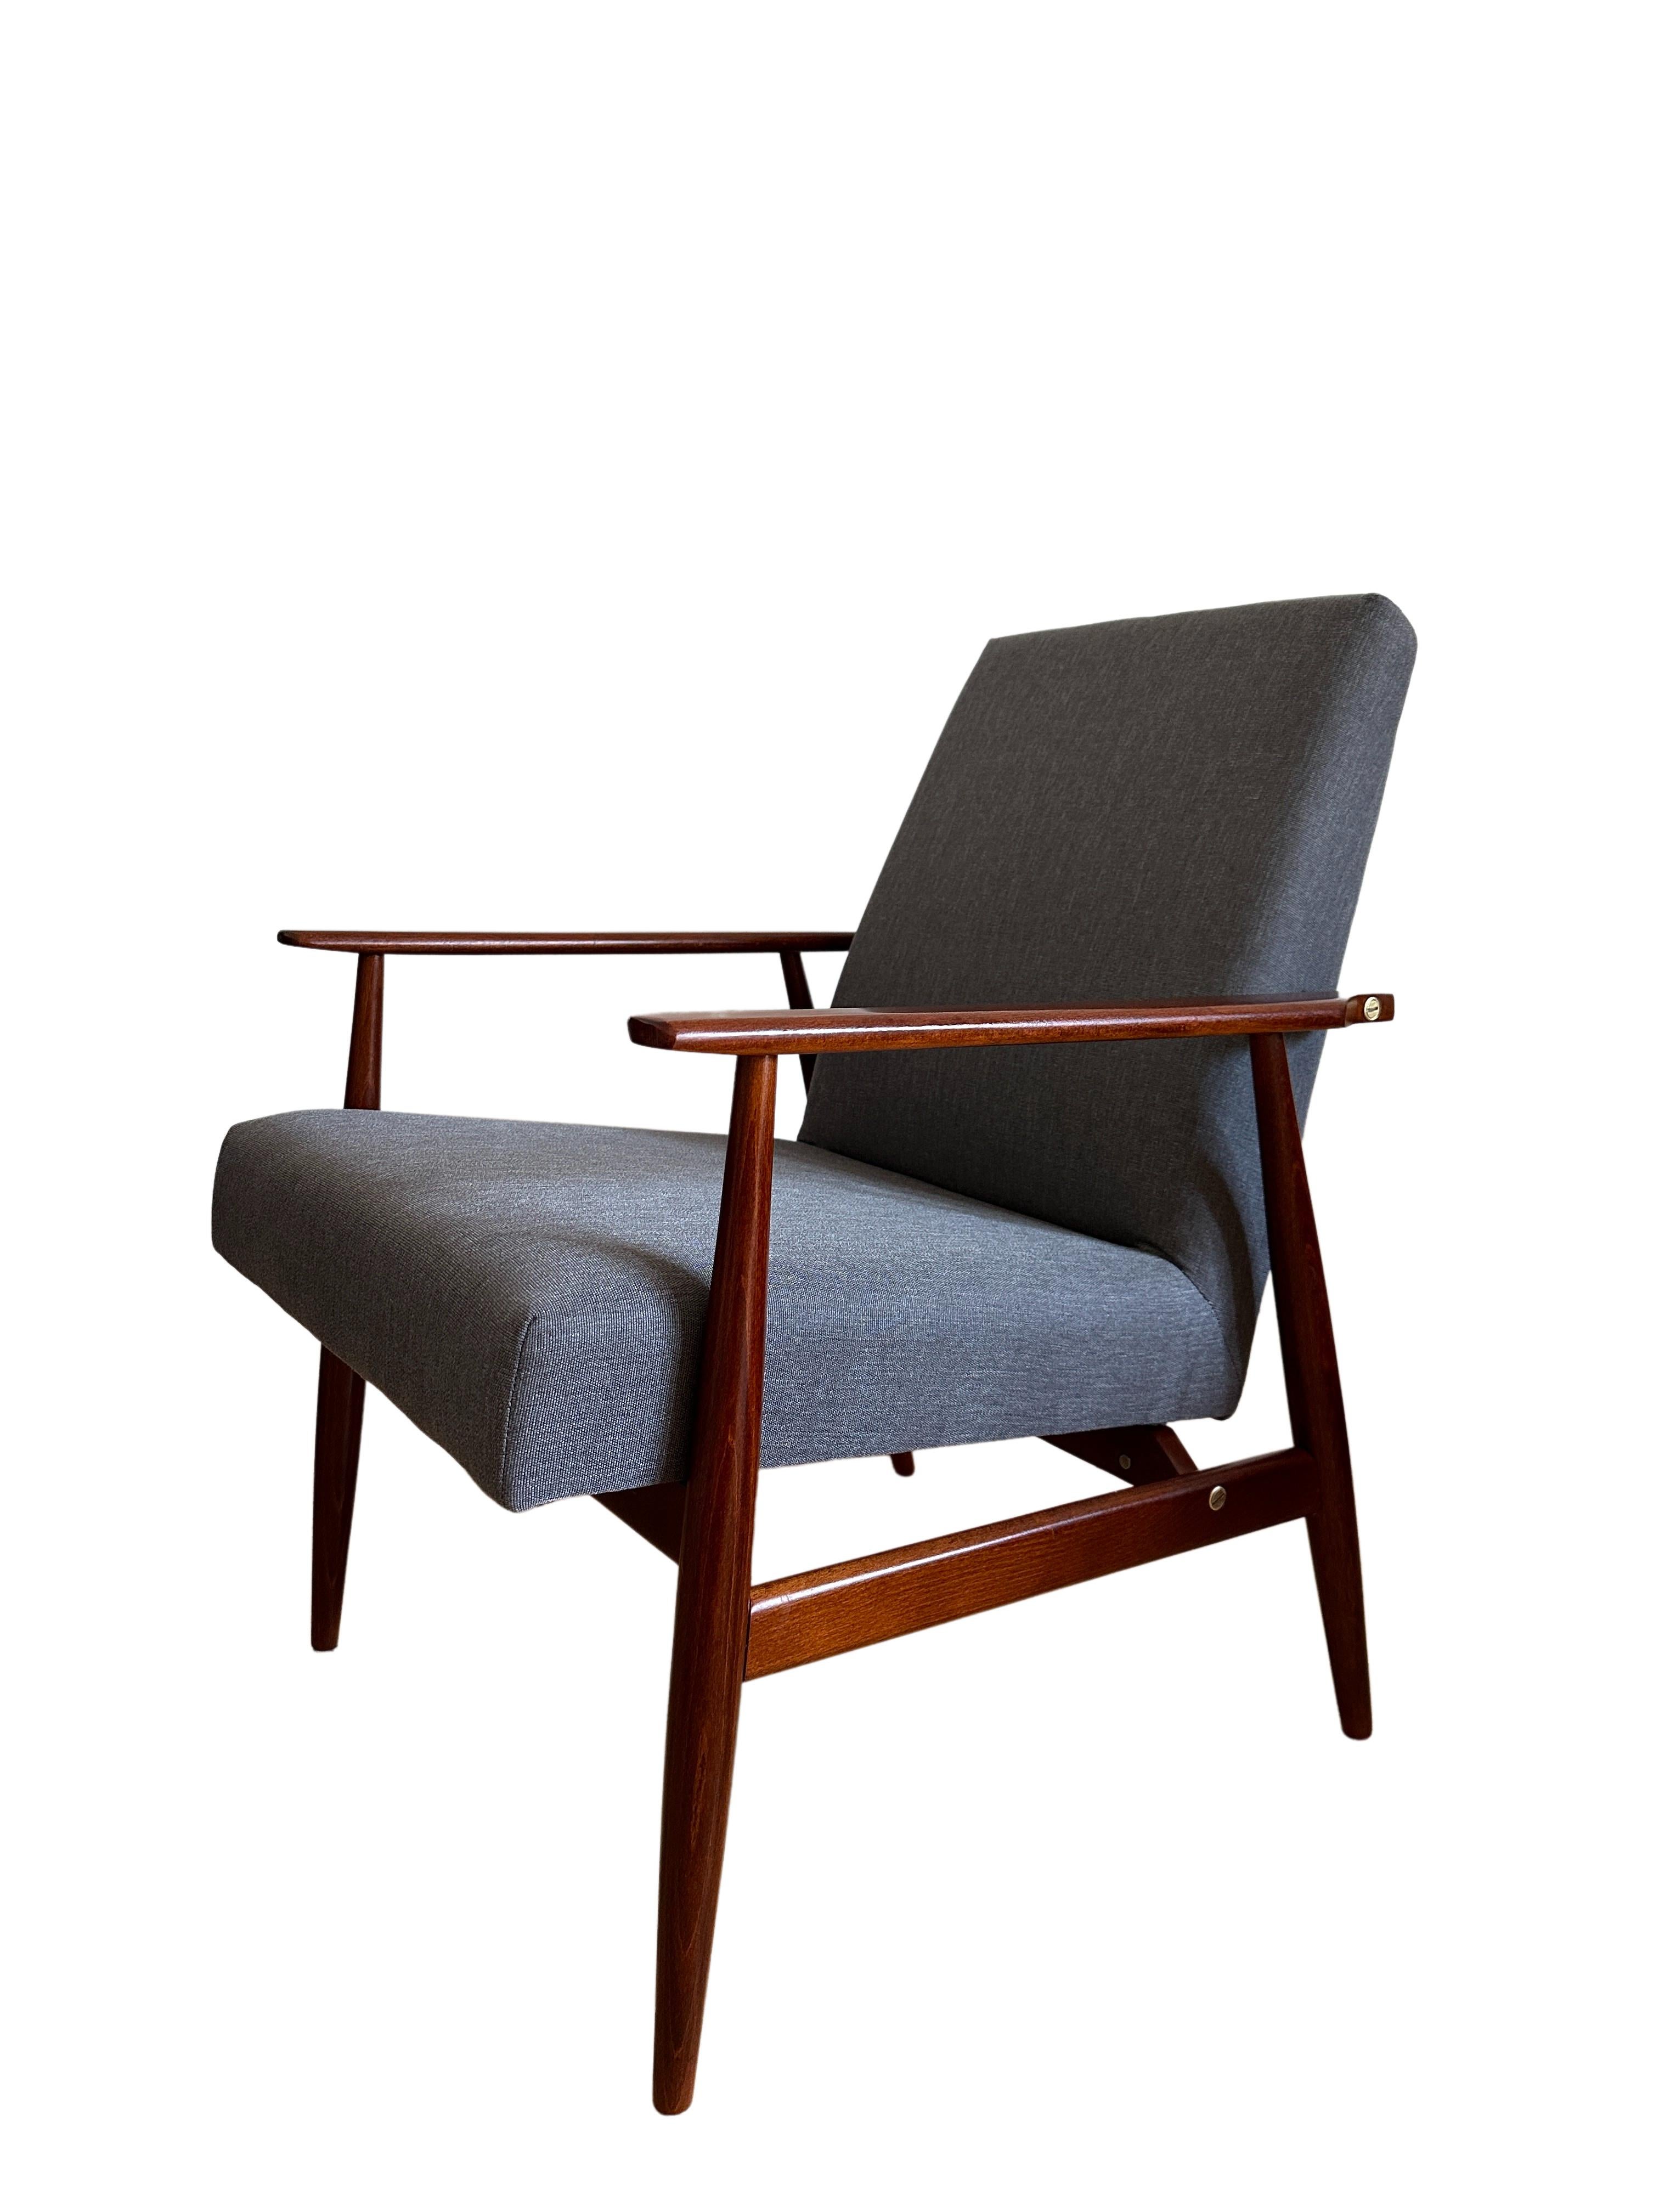 Midcentury Armchair in Kvadrat Upholstery by Henryk Lis, Europe, 1960s For Sale 1